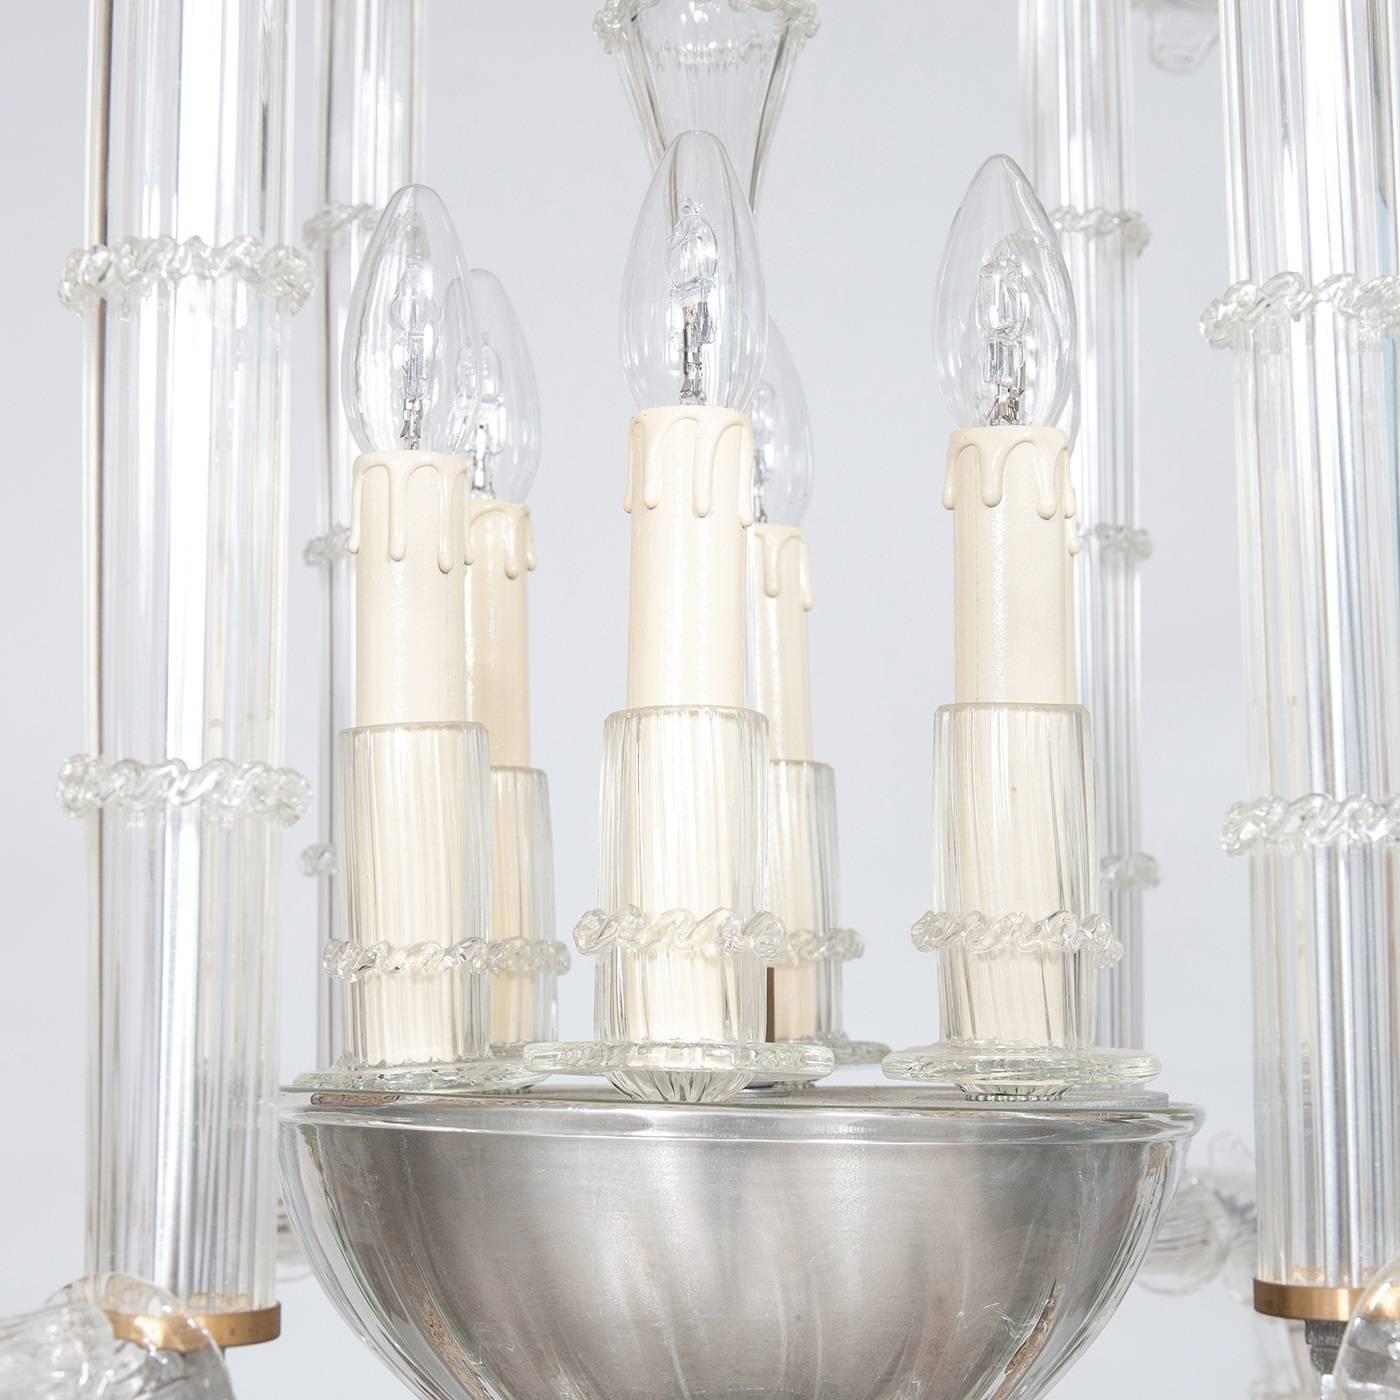 The Cesendello chandelier was entirely crafted in transparent Murano glass and is composed of a central element with six uprights surrounding a group of six outward-facing lights, illuminating all in all directions. On the top and bottom of the